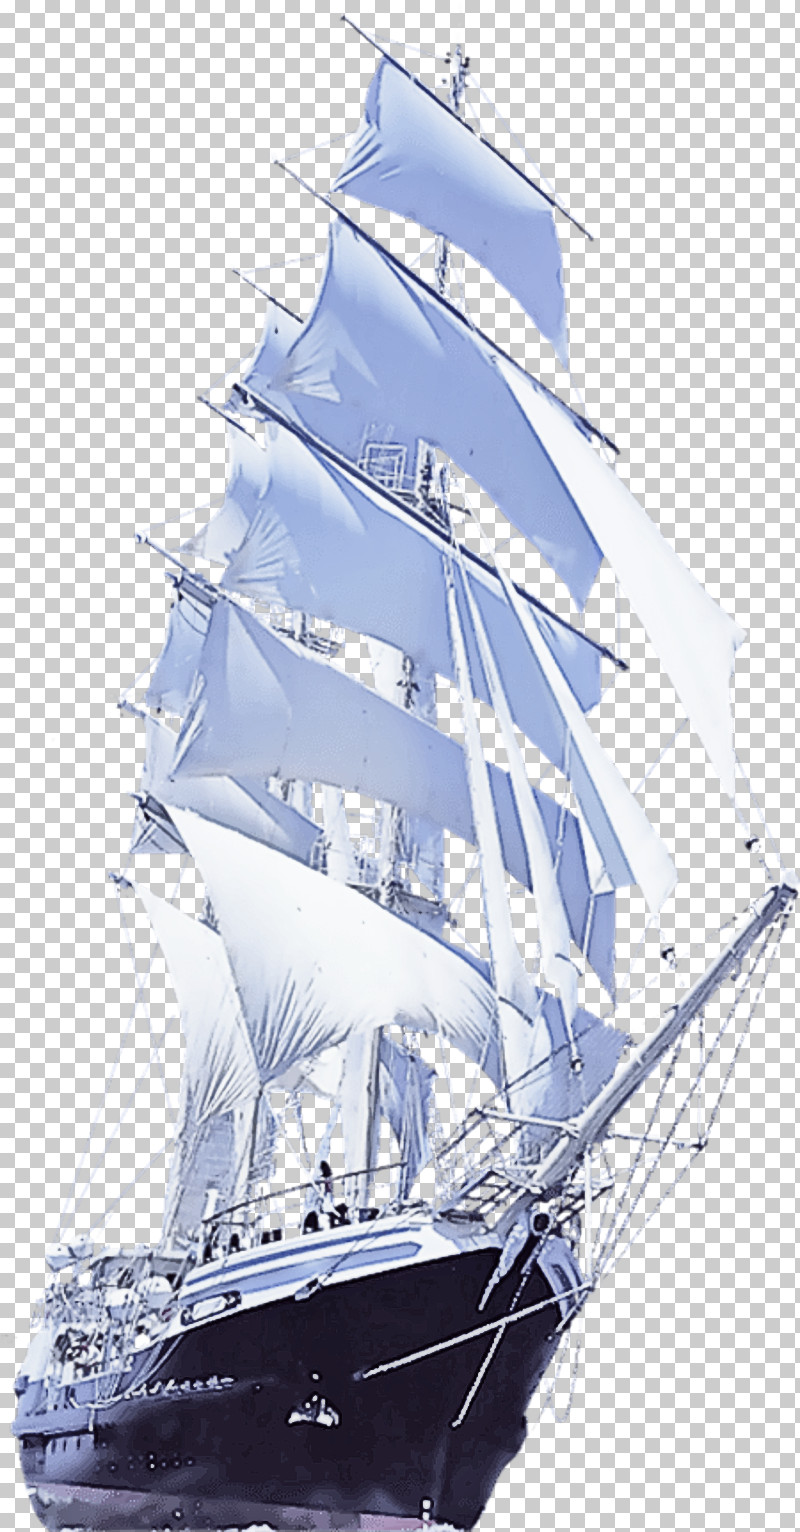 Sailing Ship Tall Ship Full-rigged Ship Vehicle Barquentine PNG, Clipart, Baltimore Clipper, Barque, Barquentine, Boat, Bomb Vessel Free PNG Download